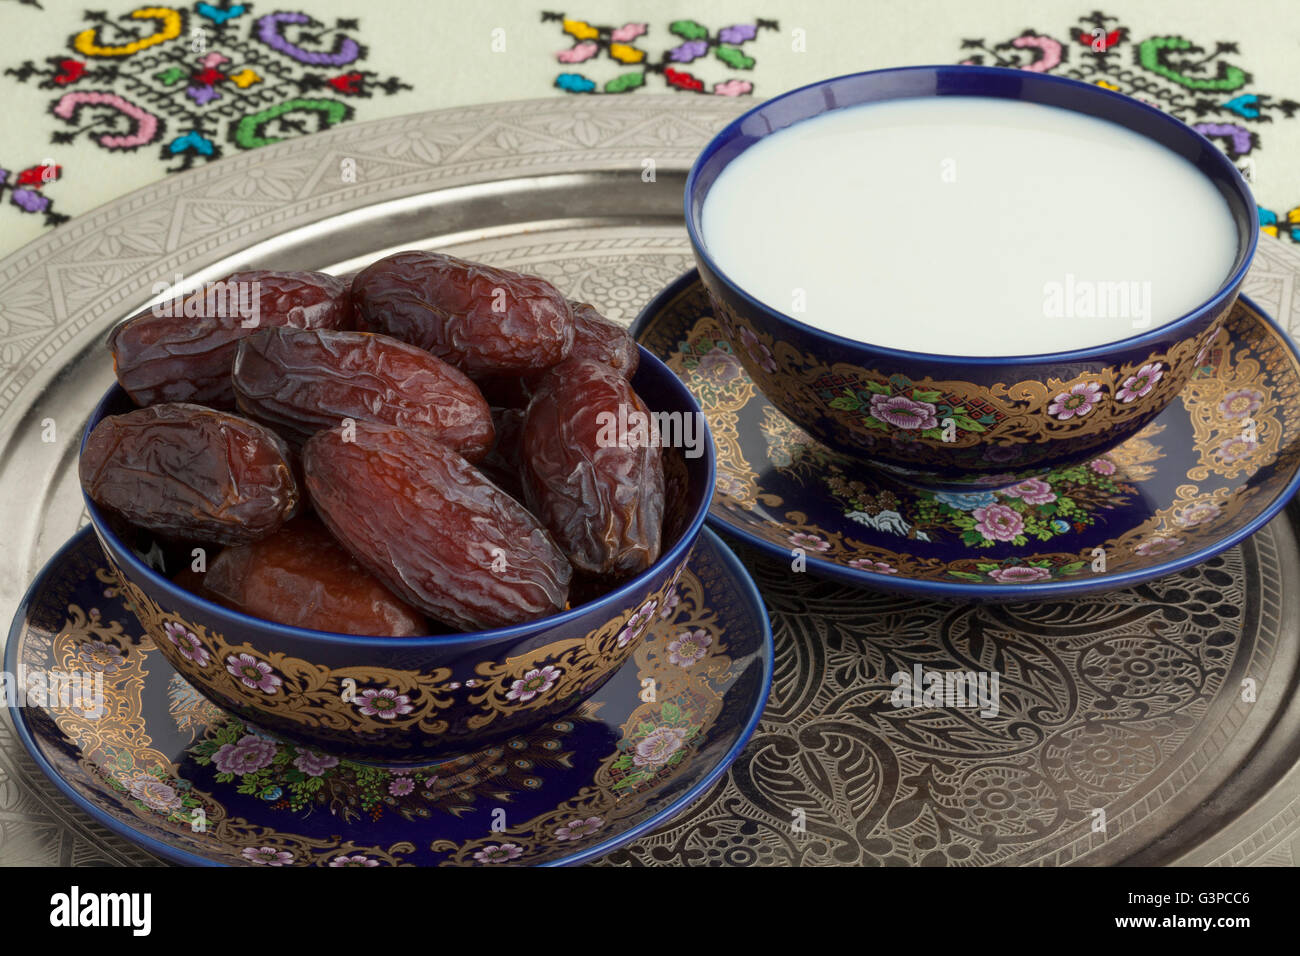 Festive Moroccan bowls with milk and dates Stock Photo